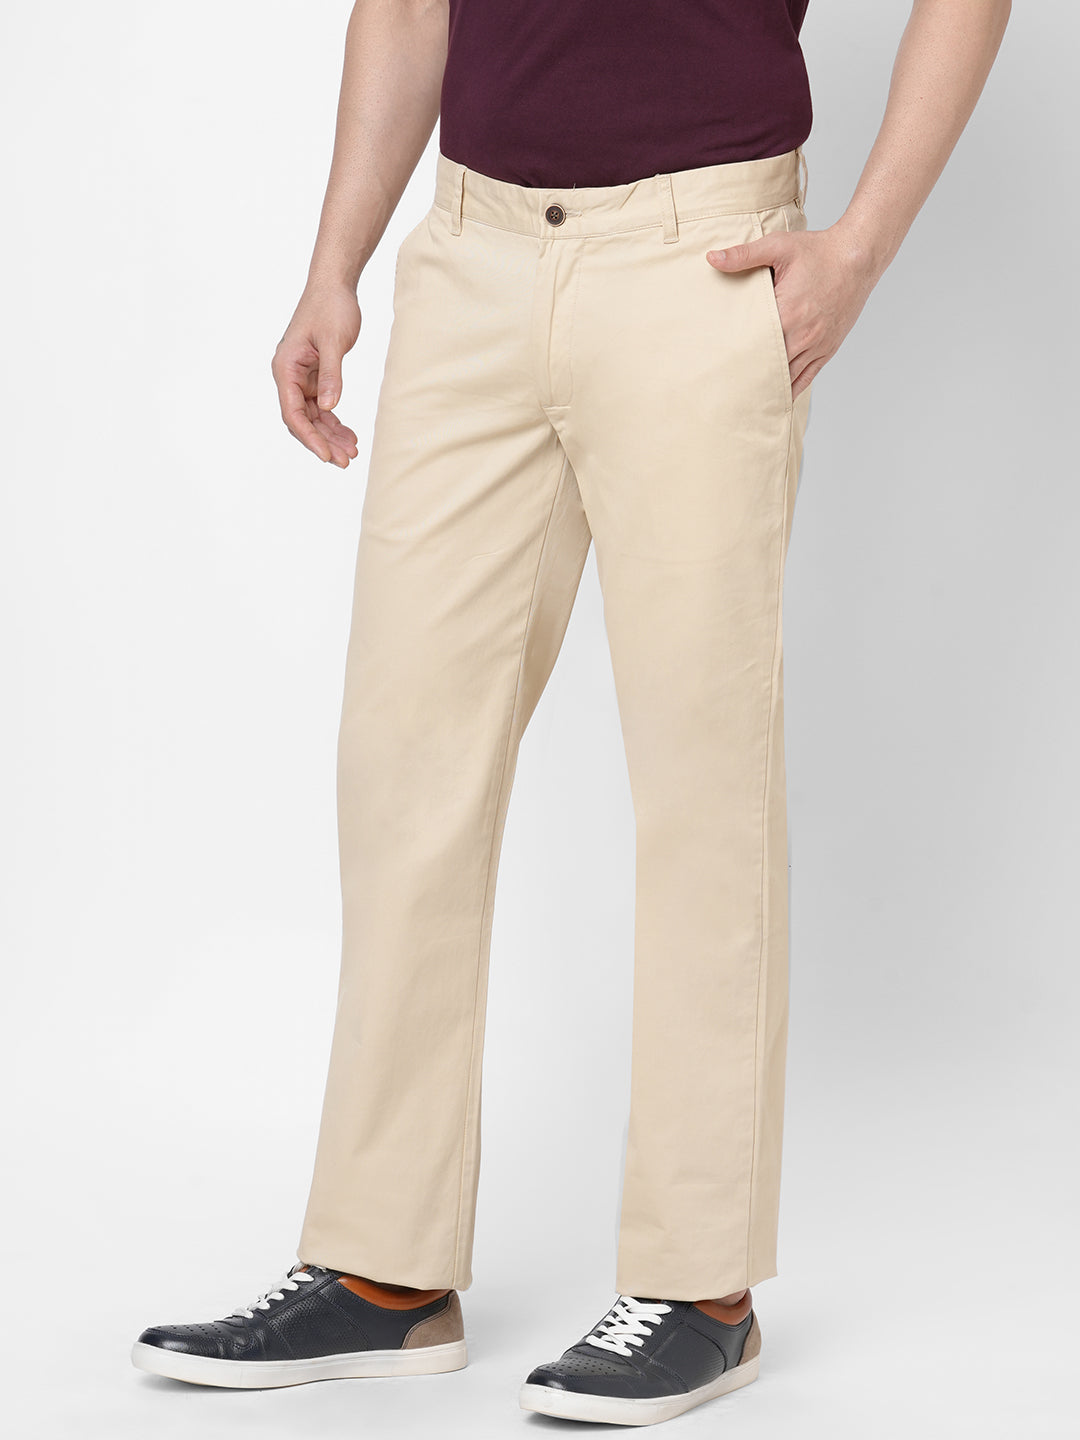 The Best WideLeg Trousers Brands For Men 2023 Edition